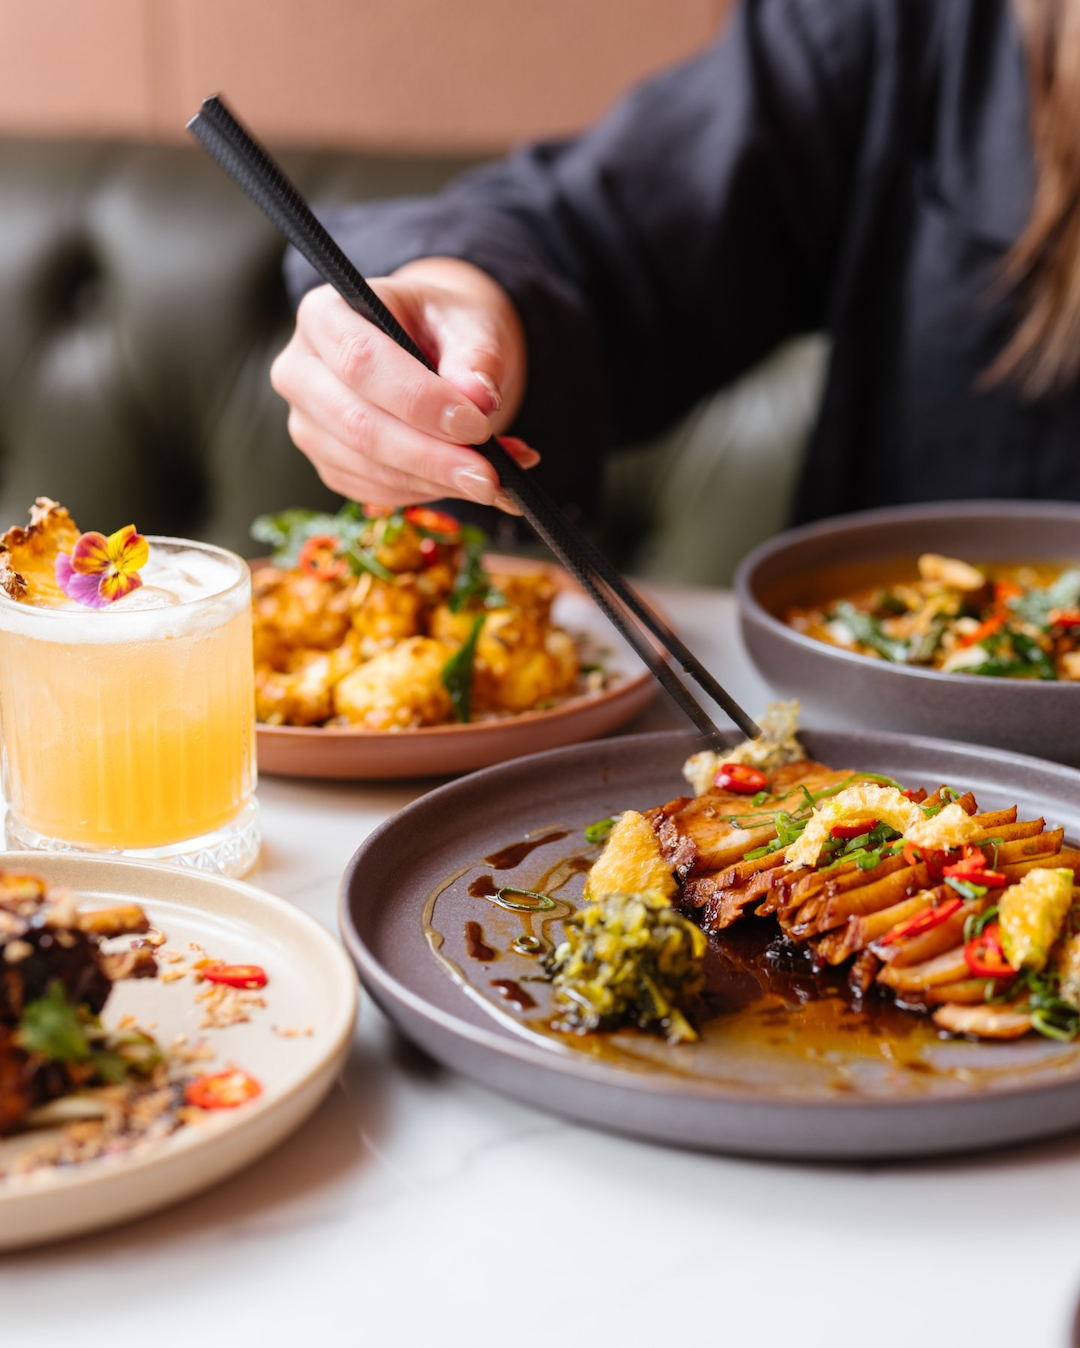 Dishes from Lotus inside The Beaufort, Mount Lawley